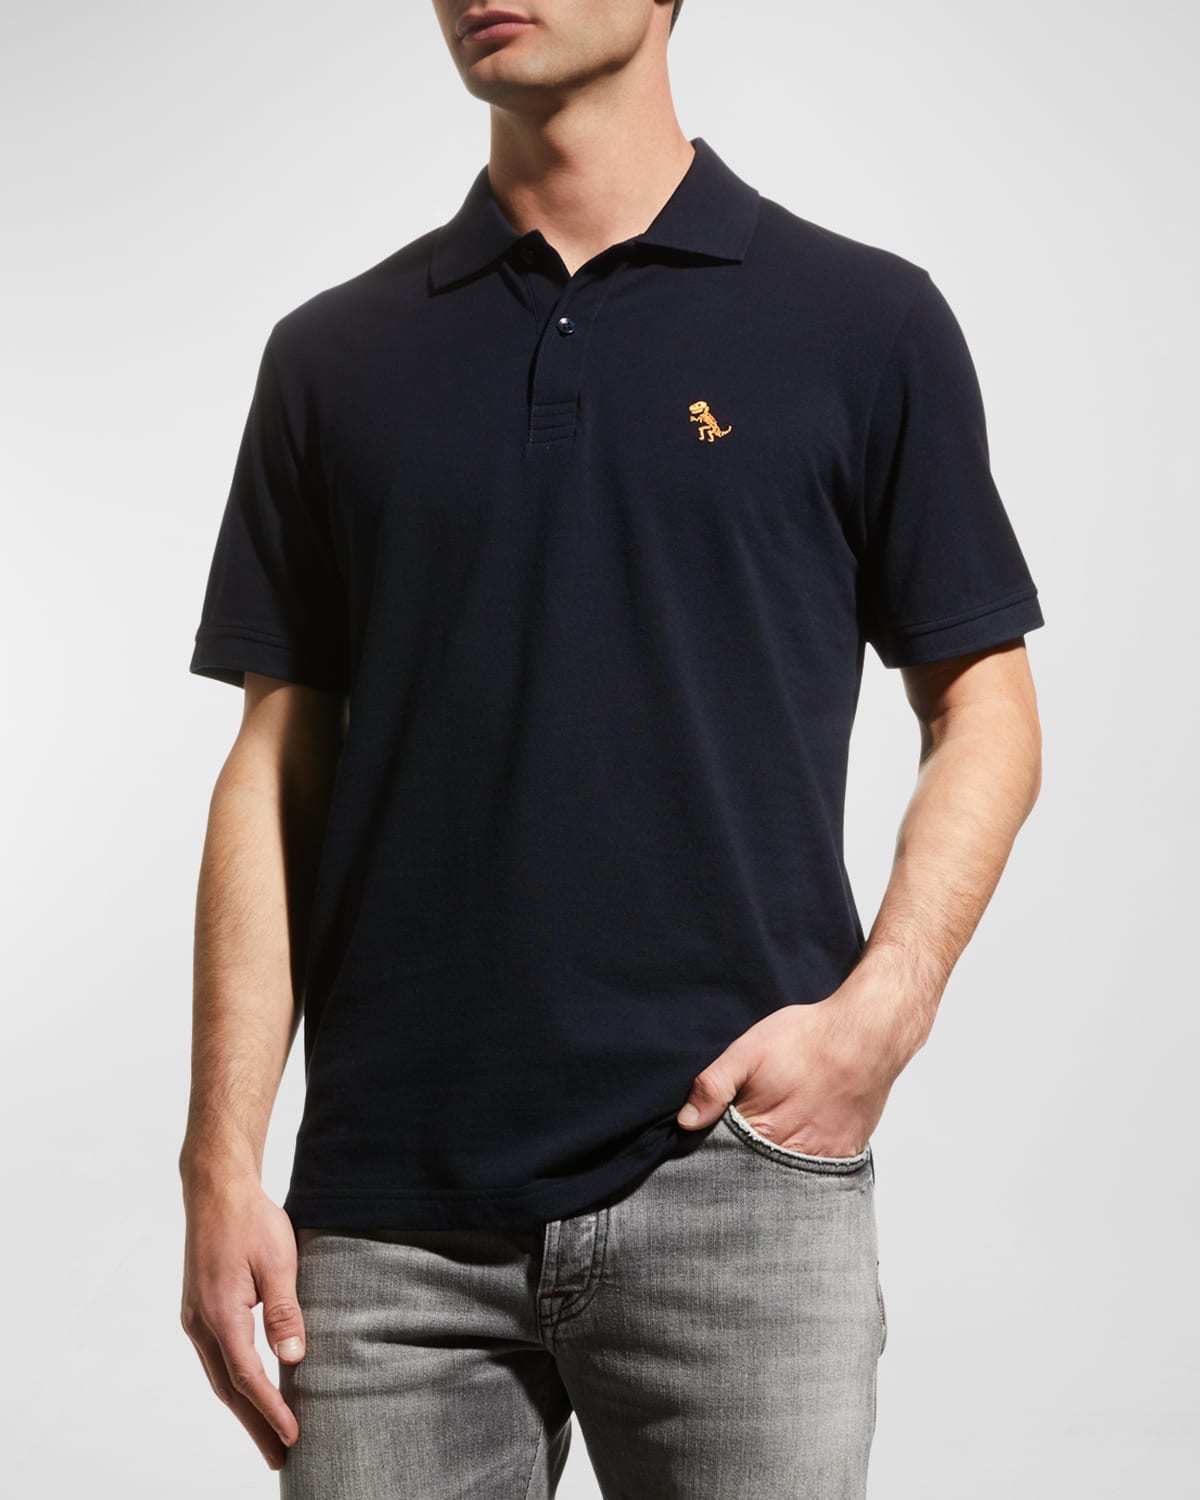 Jared Lang Men's Dino Knit Pima Cotton Polo Shirt In Navy Blue